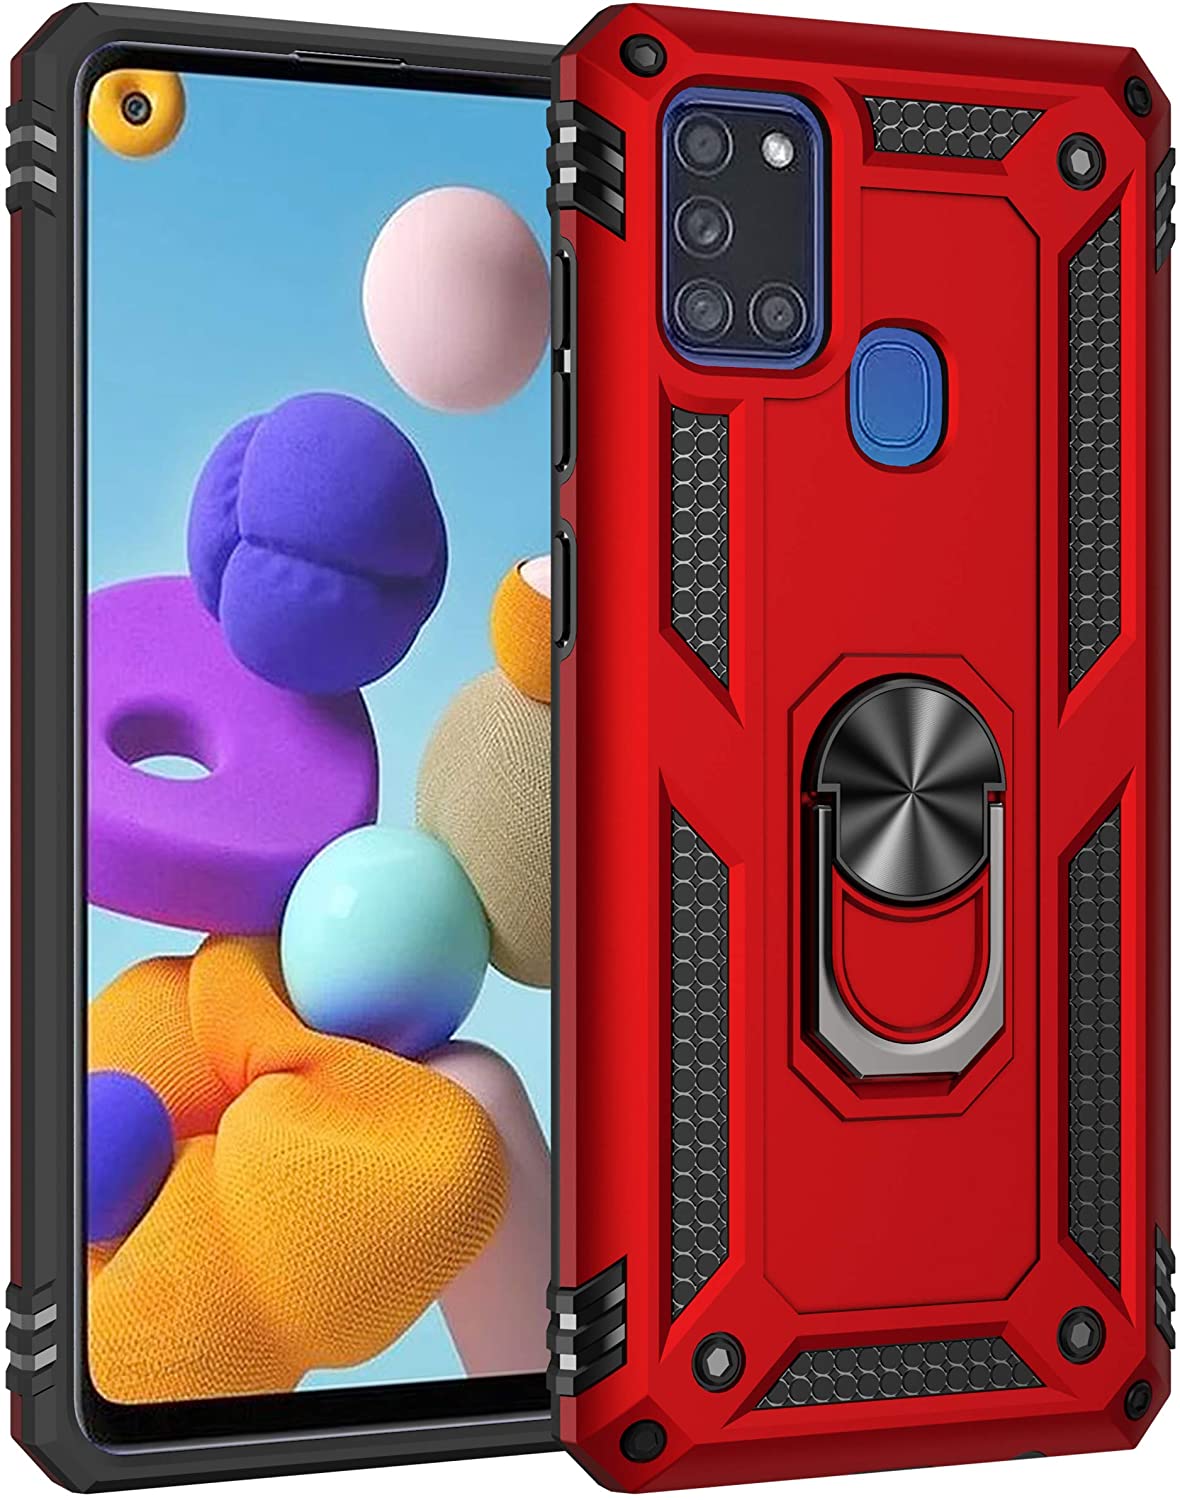 Tech Armor Ring Grip Case with Metal Plate for Samsung Galaxy A21S (Red)